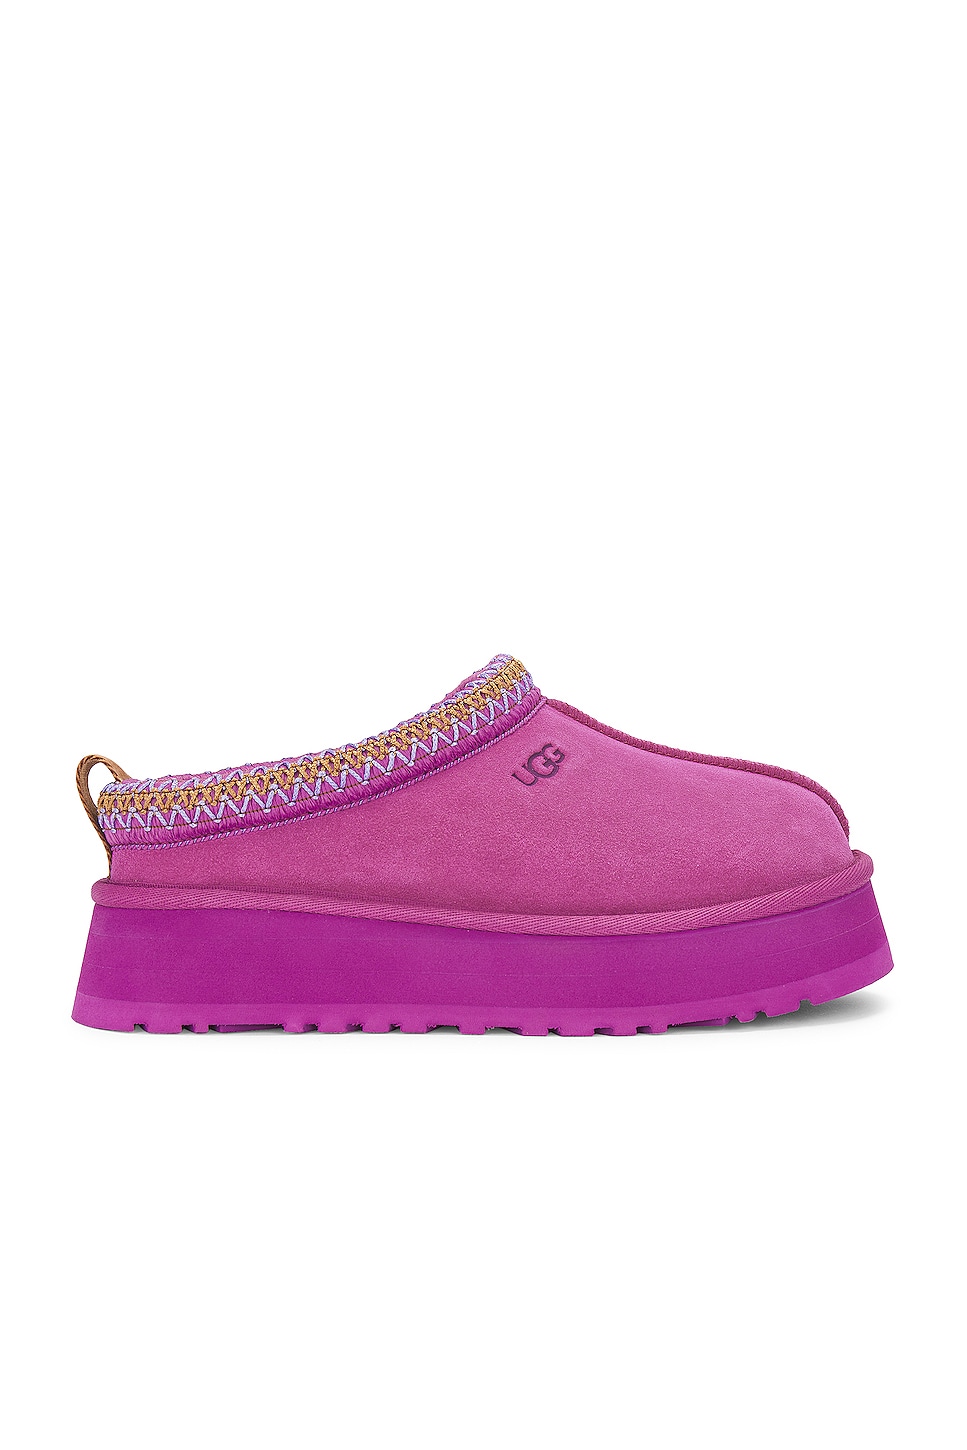 Image 1 of UGG Tazz Boot in Mangosteen